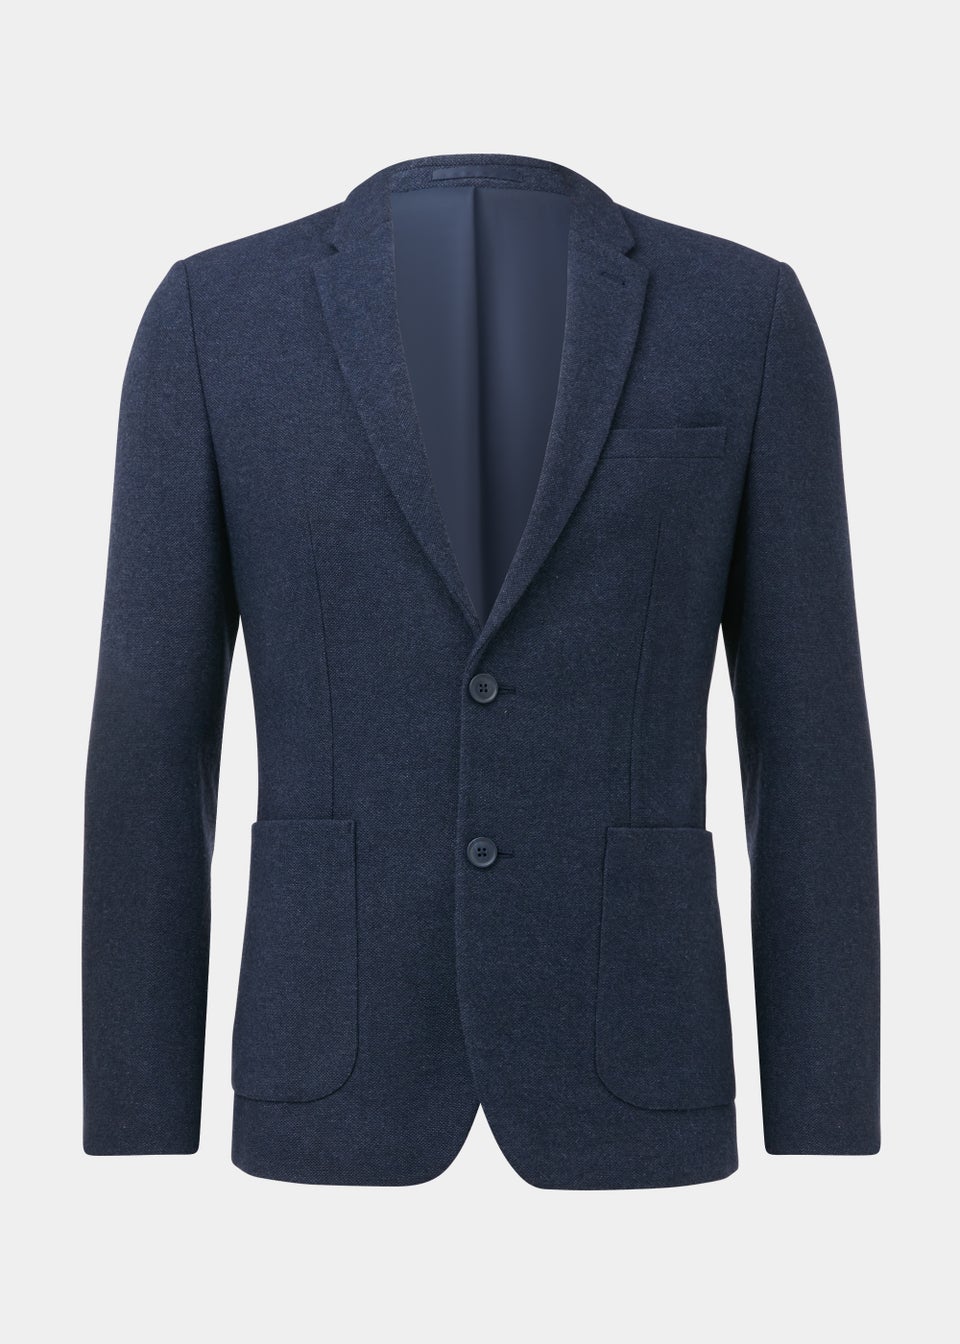 Taylor & Wright Donegal Navy Slim Fit Blazer